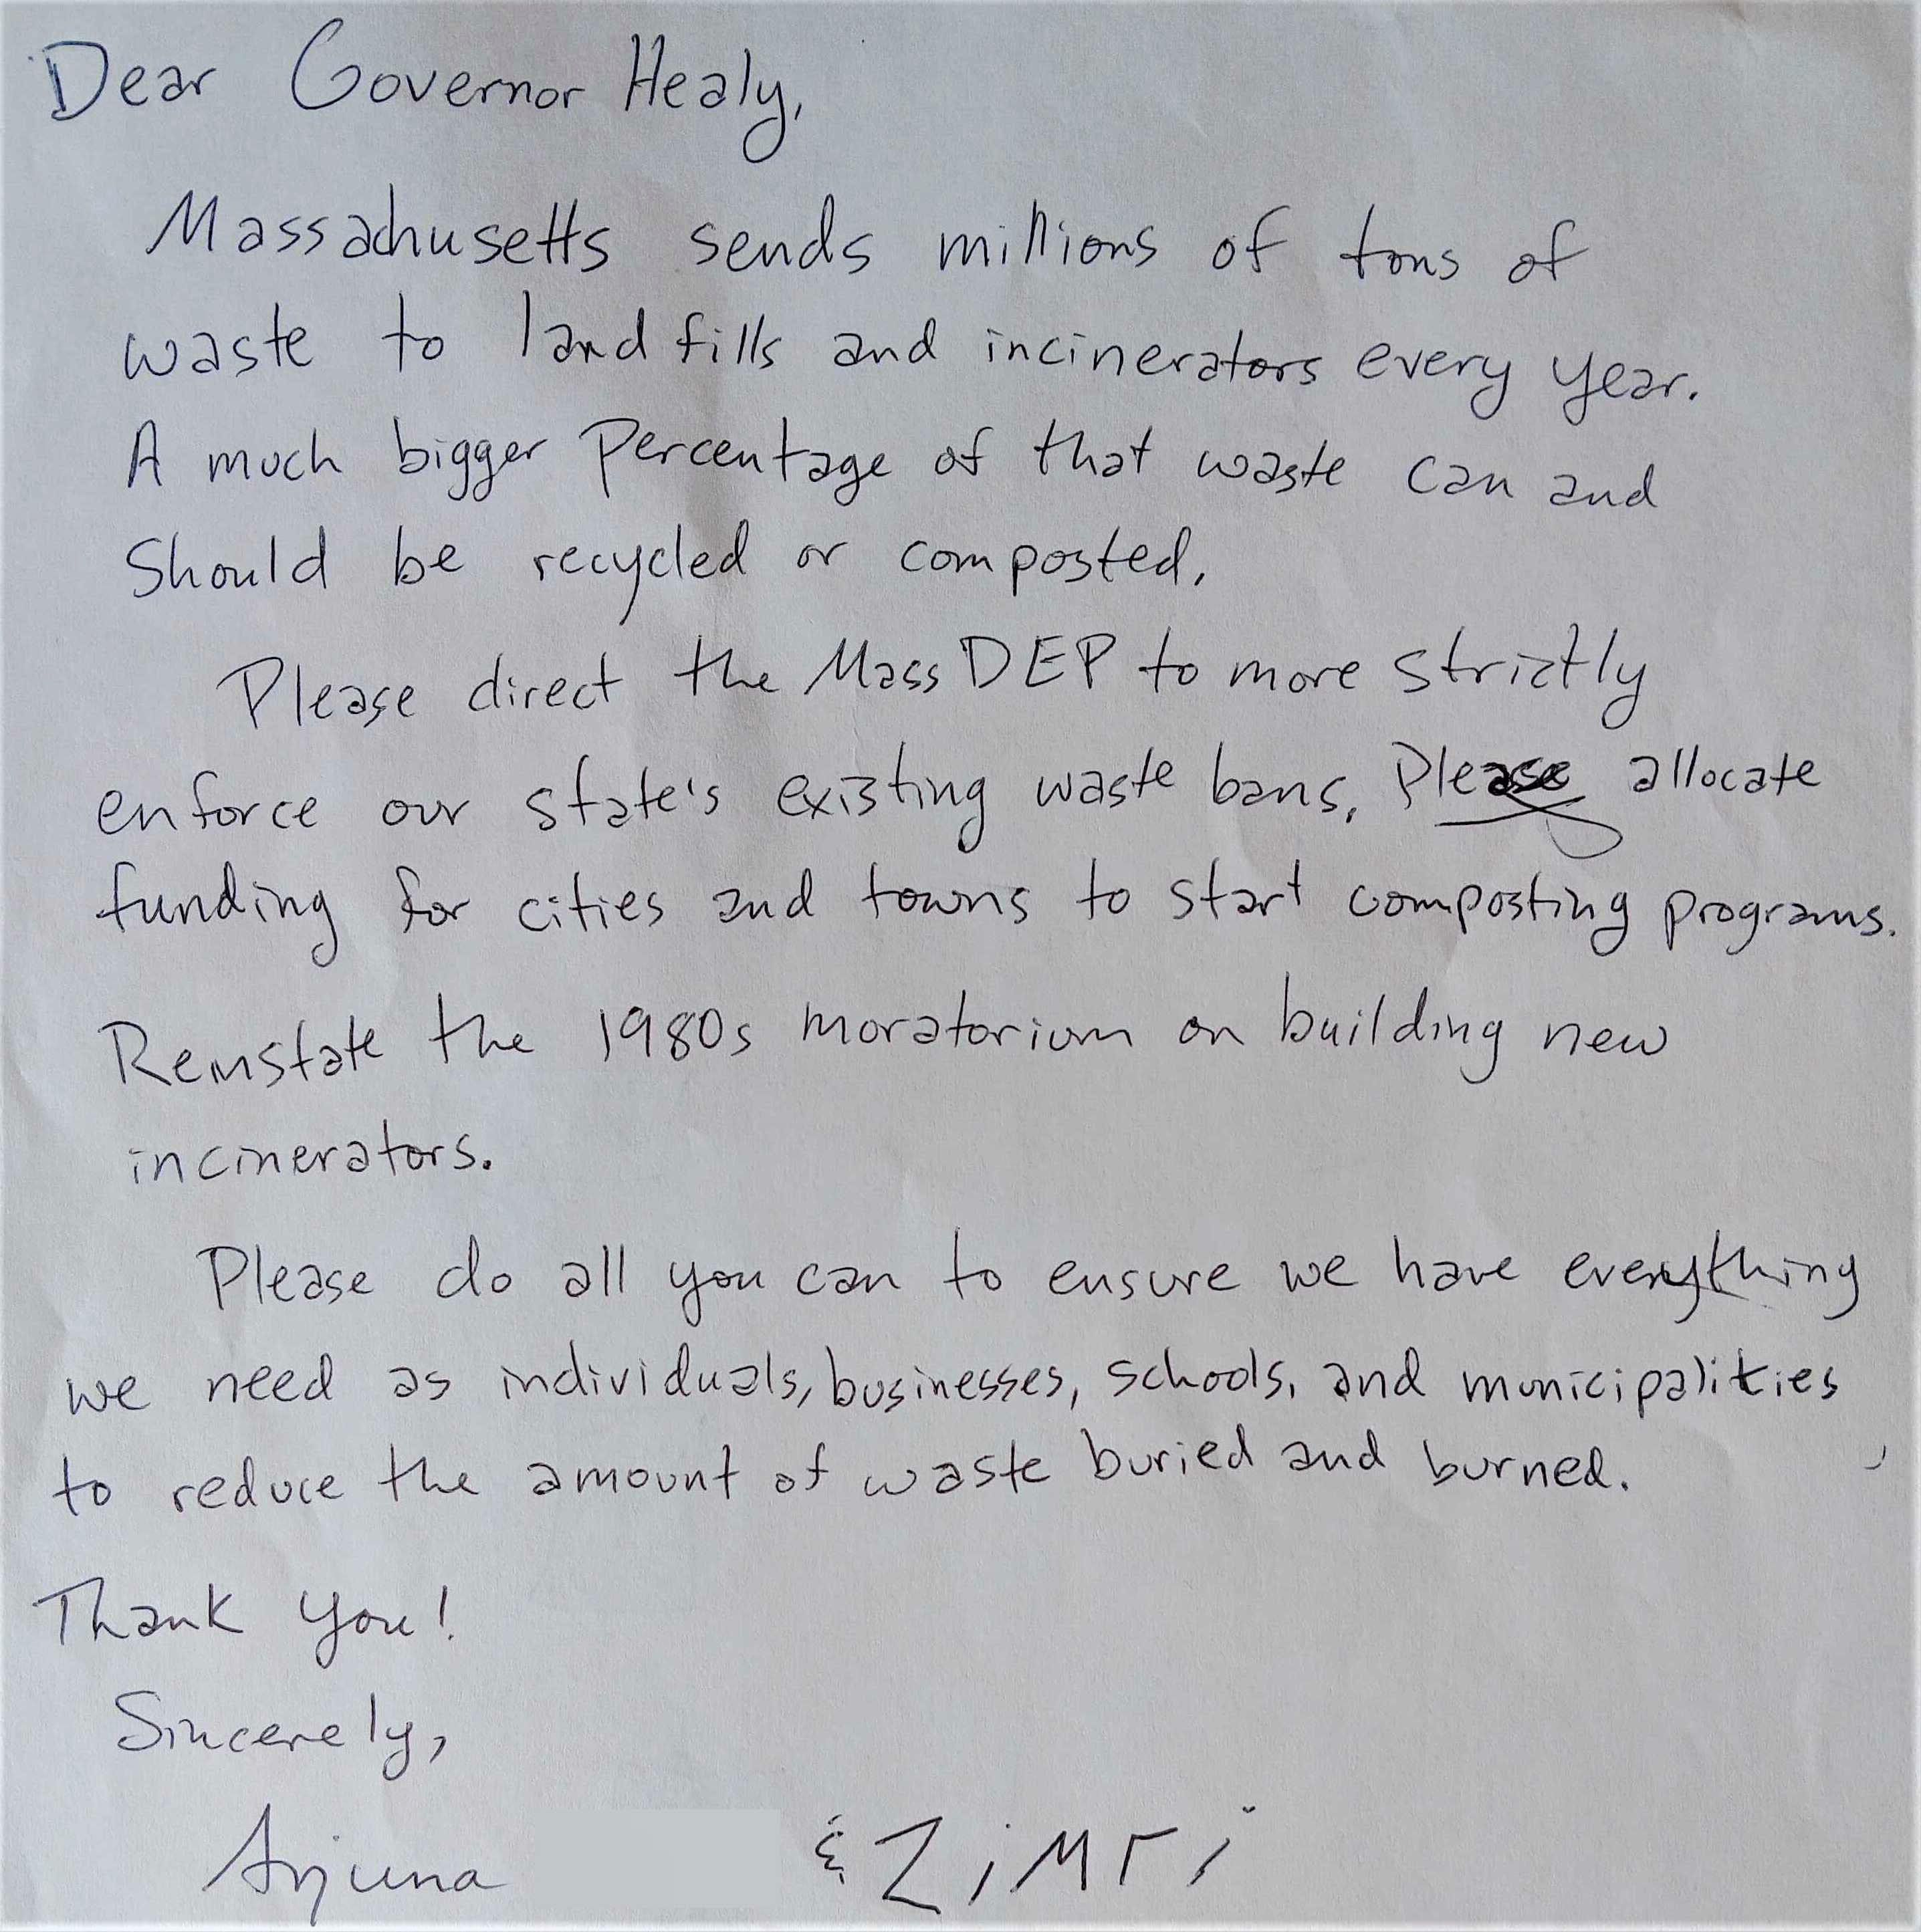 Image of a letter written to Gov Healey with text urging him to reduce plastic pollution